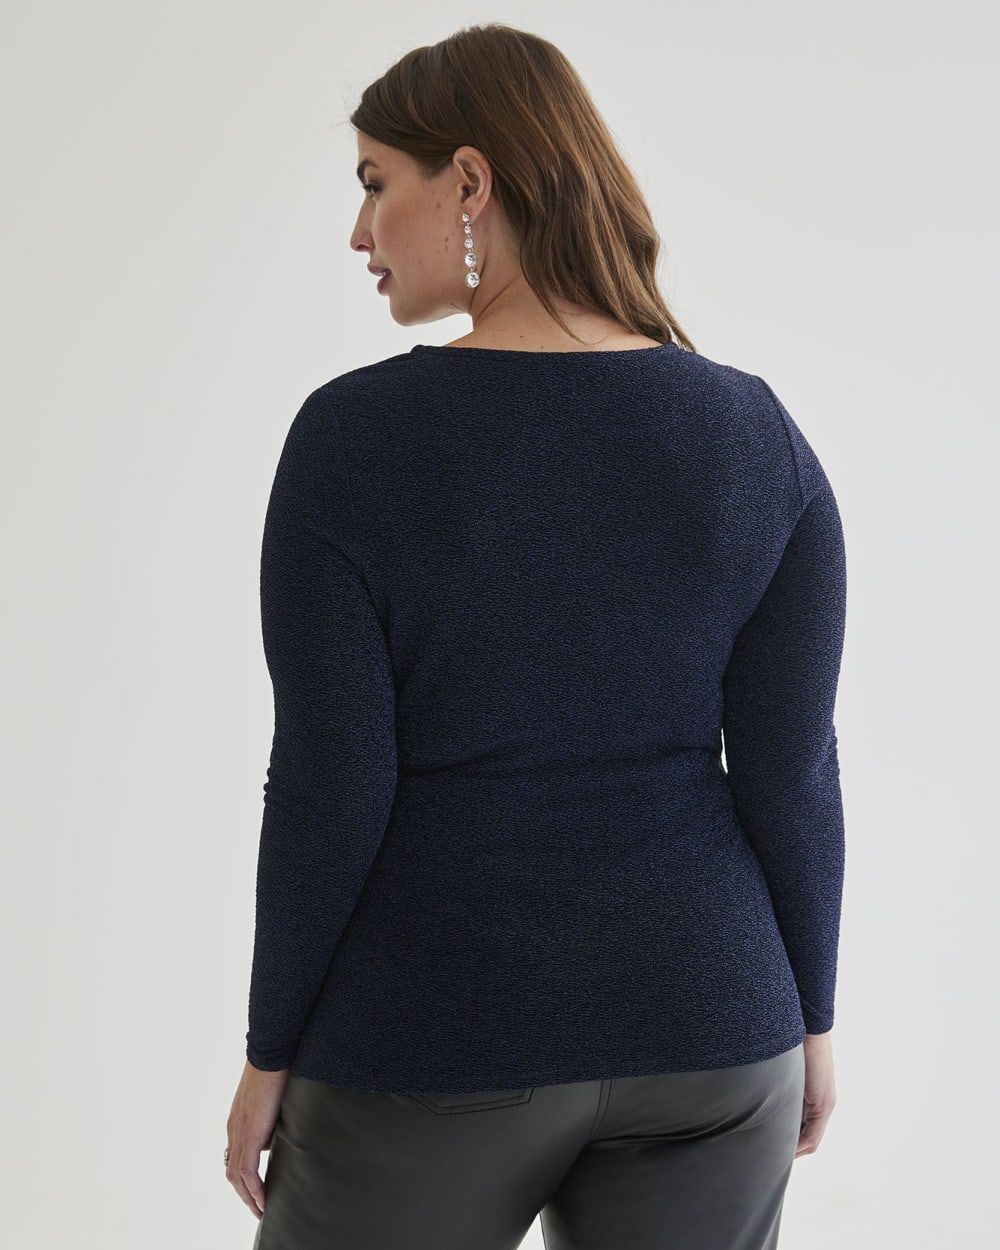 Knit Top with Front Cut-Out - Addition Elle